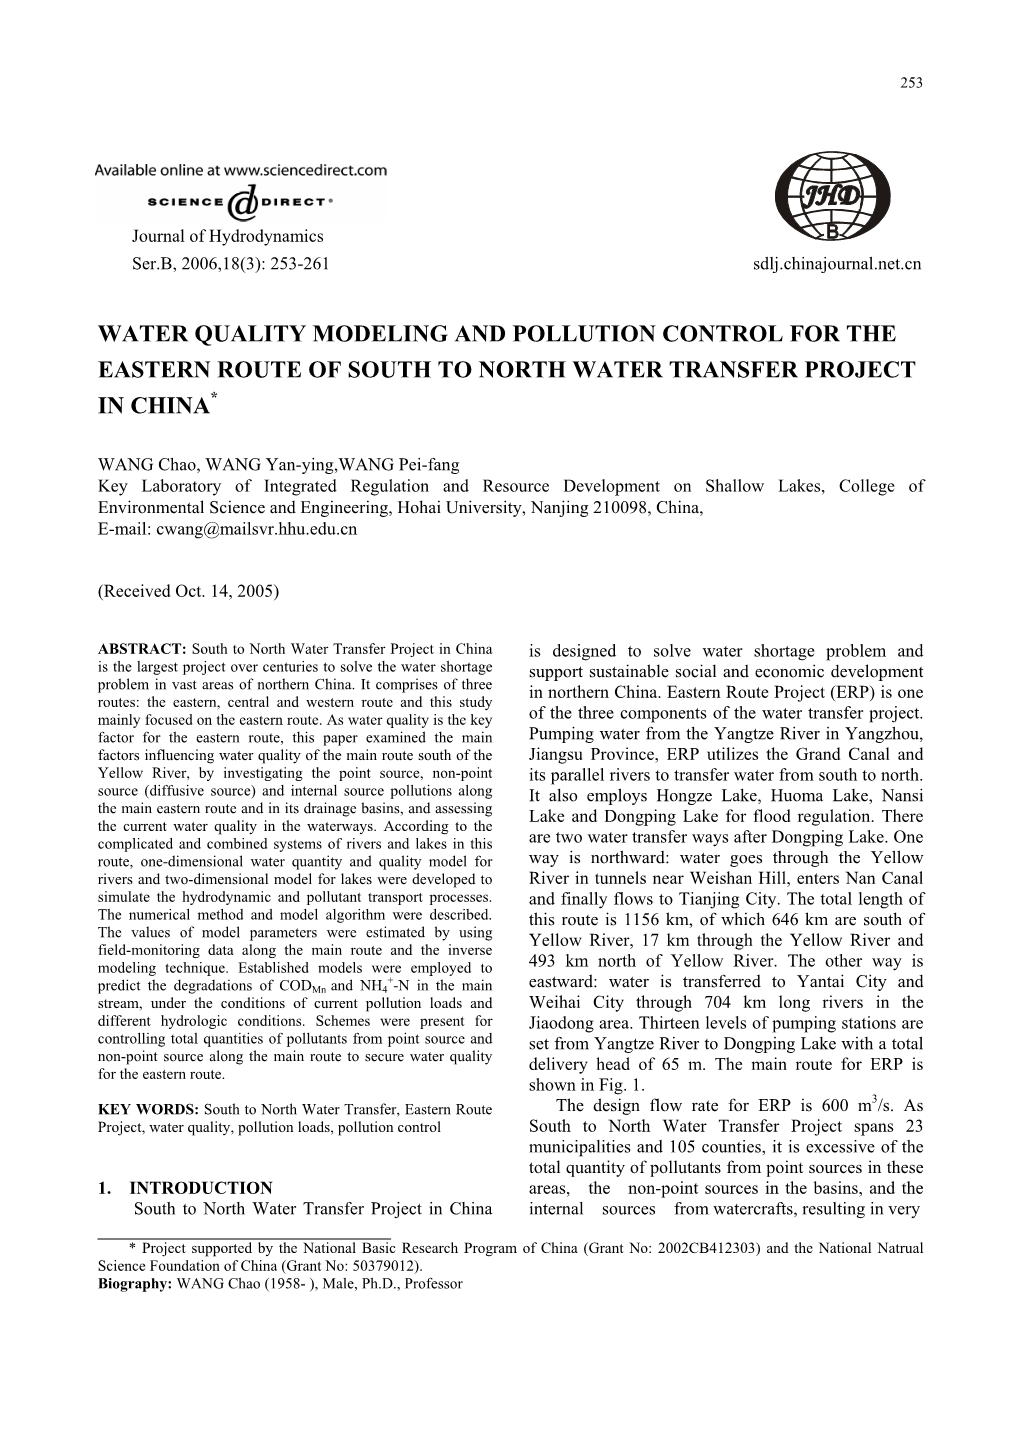 Water Quality Modeling and Pollution Control for the Eastern Route of South to North Water Transfer Project in China*